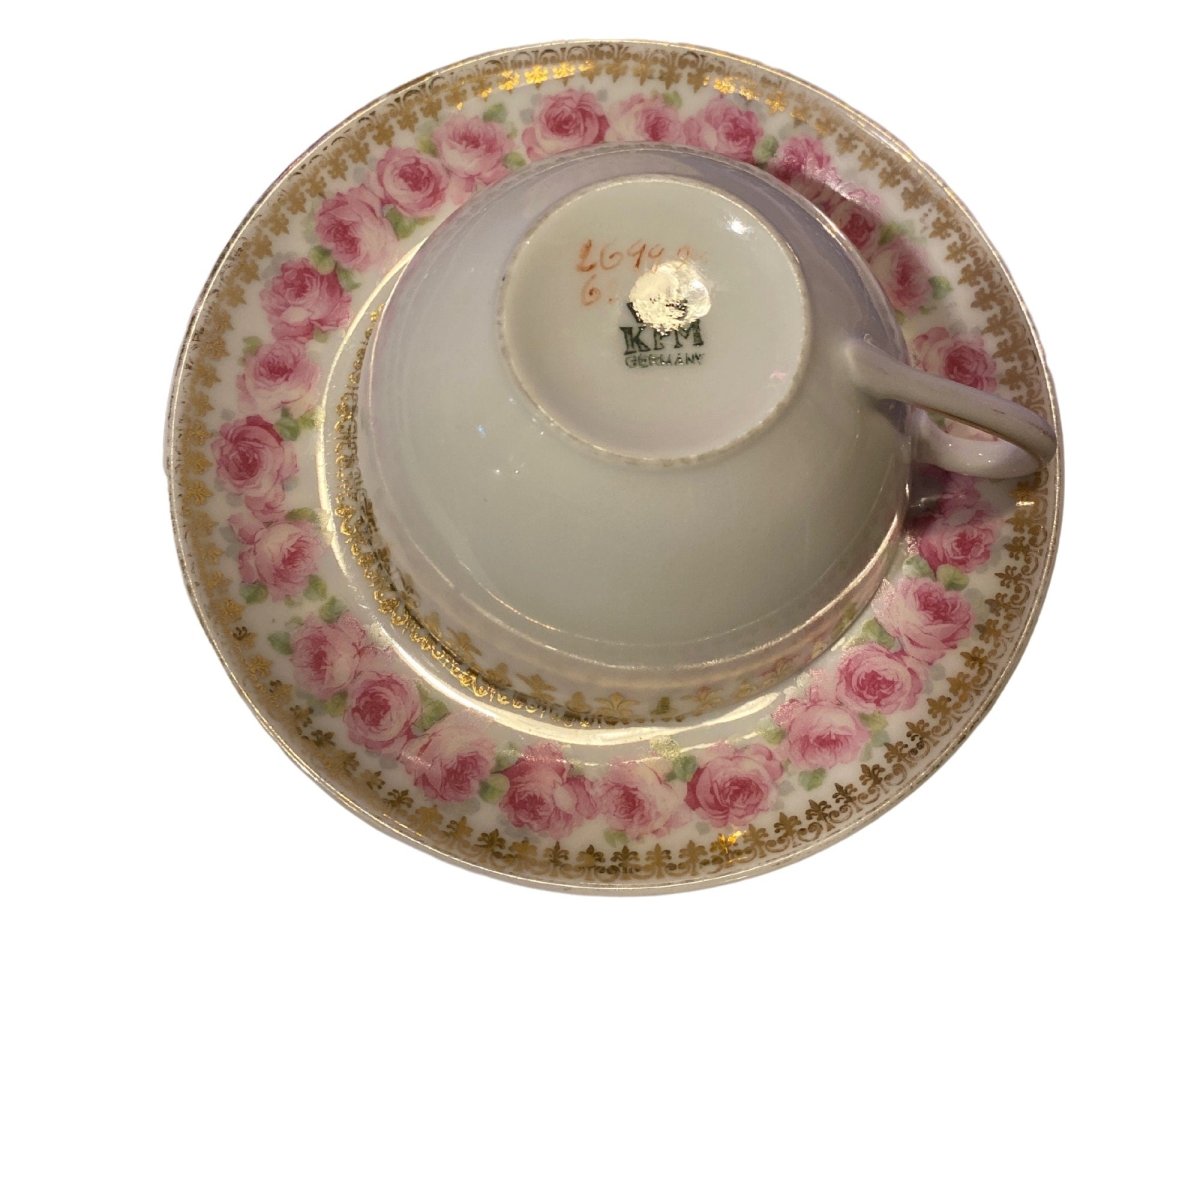 KPM/RSAG | Vintage | Tea trio with gold filigree decor and pink roses, bowl tea cups perfect for a tea party or mix & match sets - Chinamania.shop